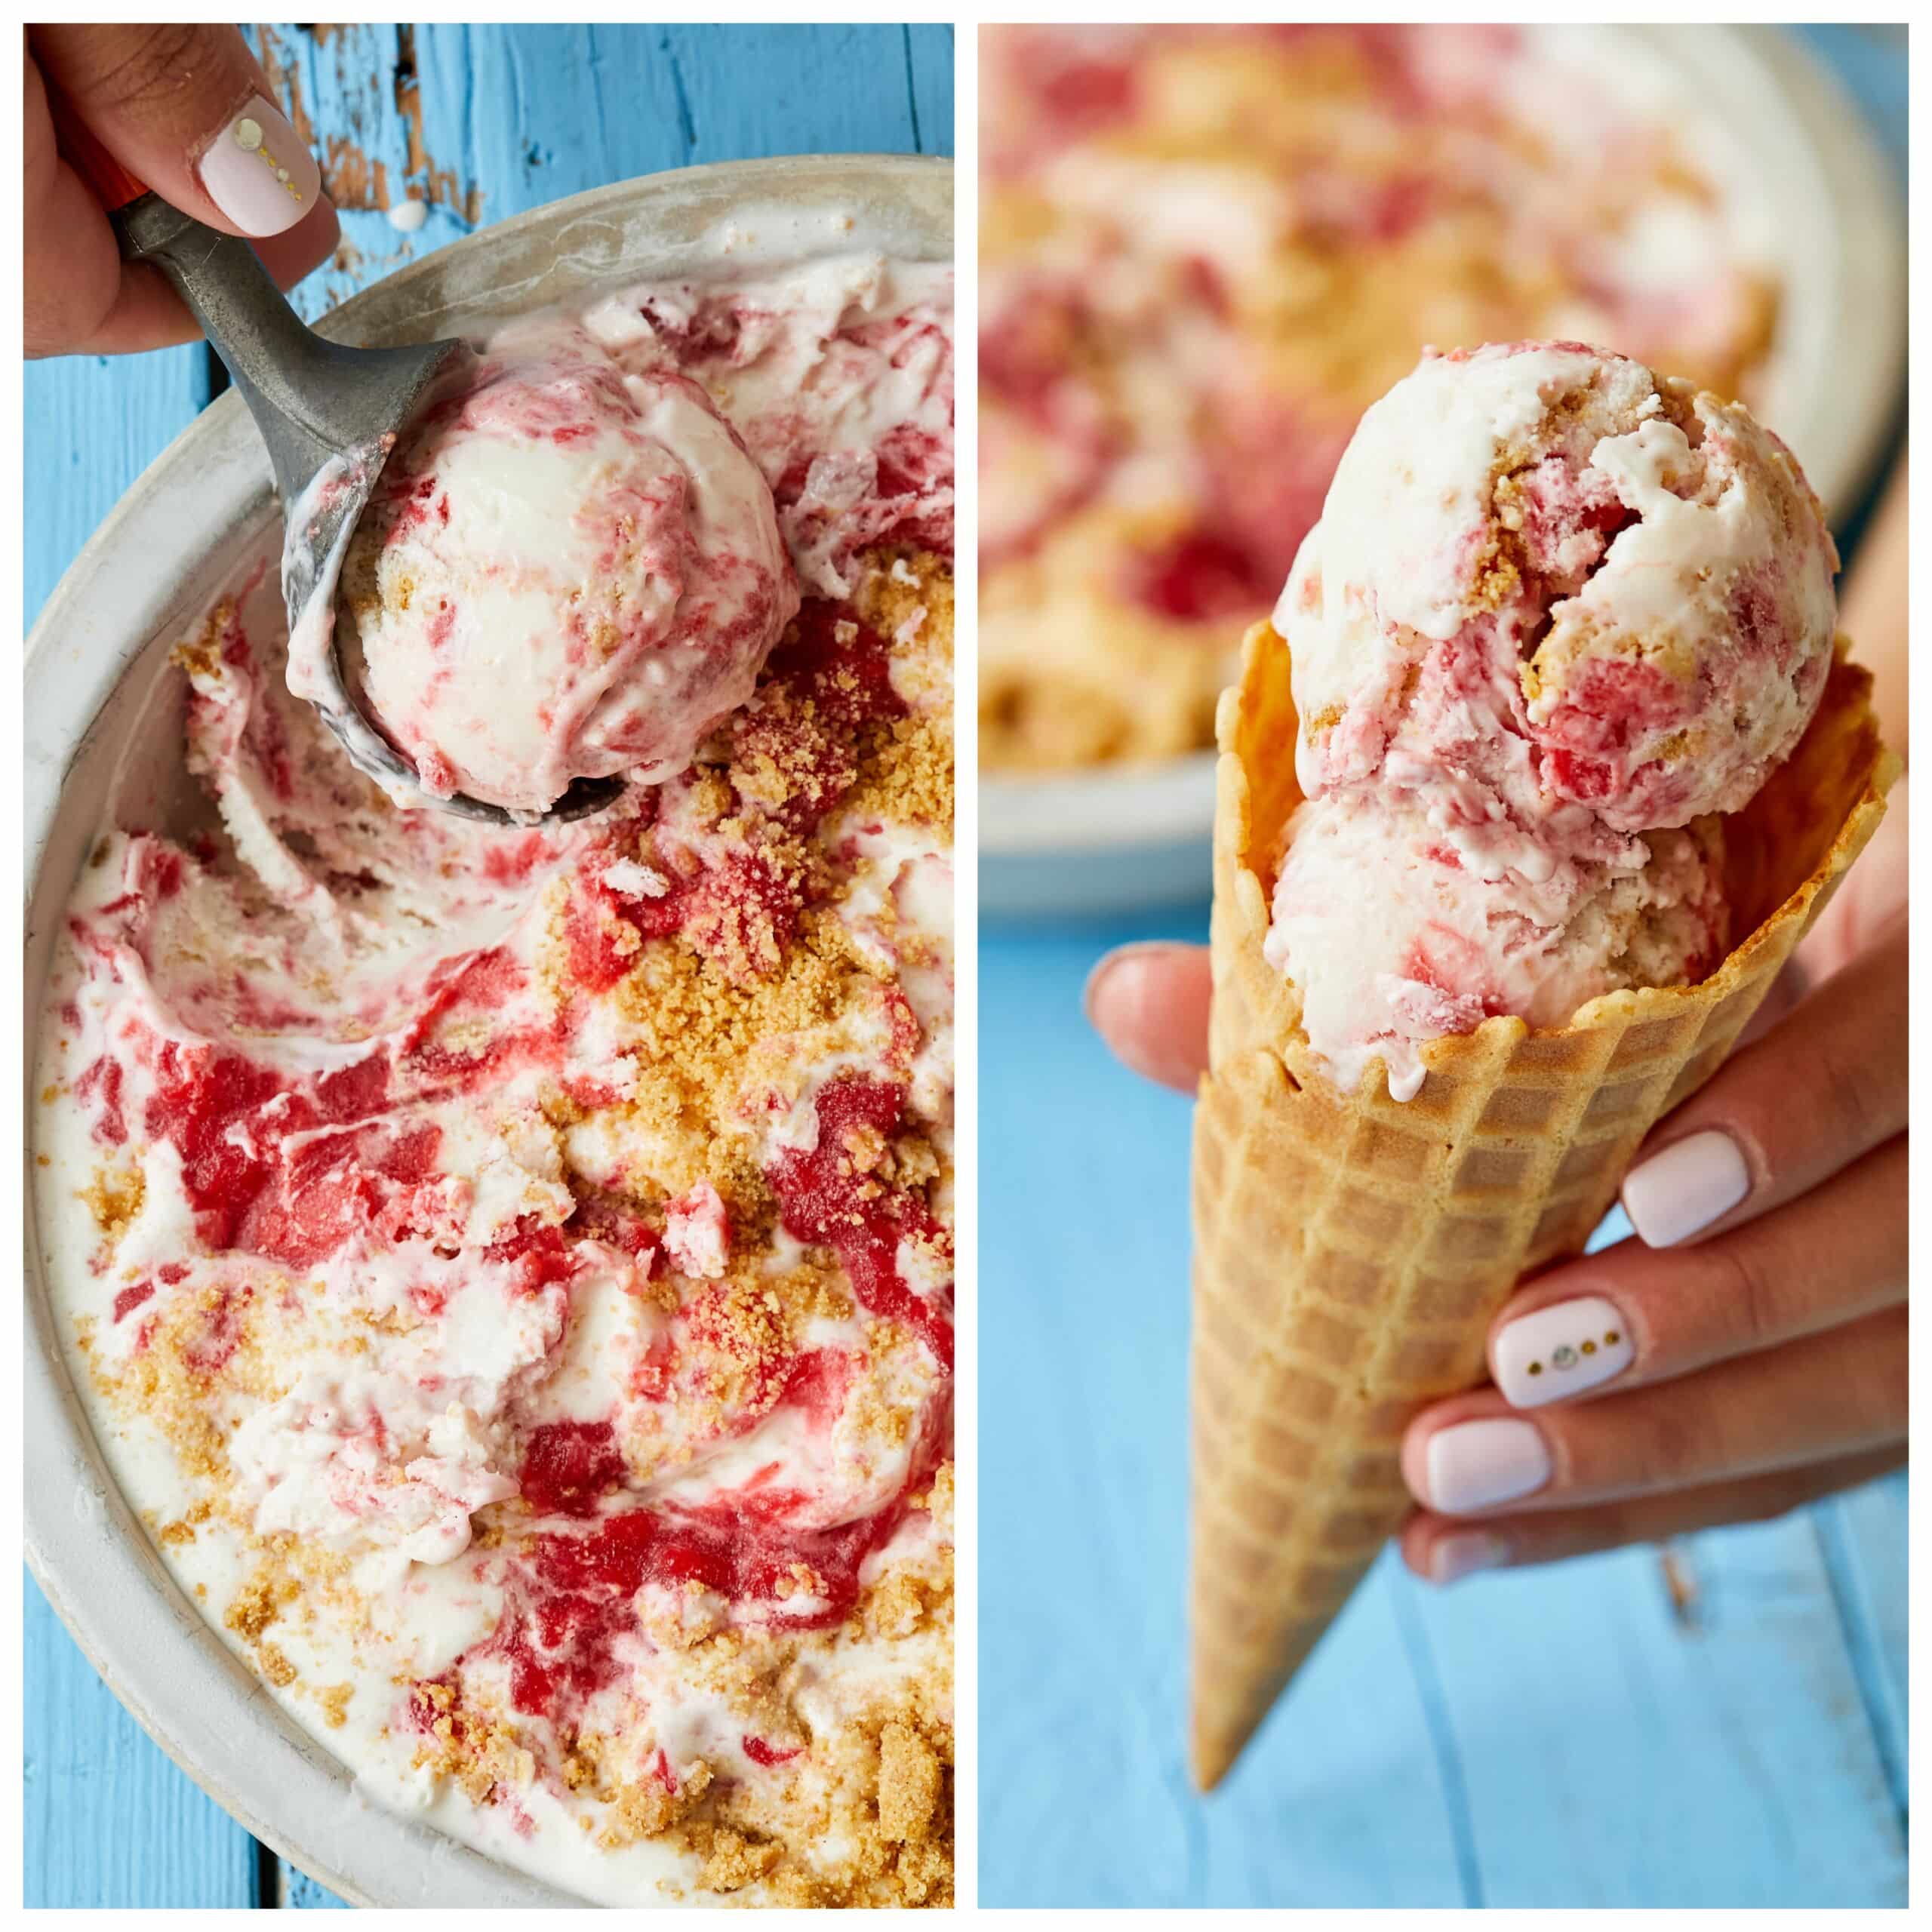 Scoop the Strawberry Cheesecake Ice Cream and serve it in an ice cream cone.